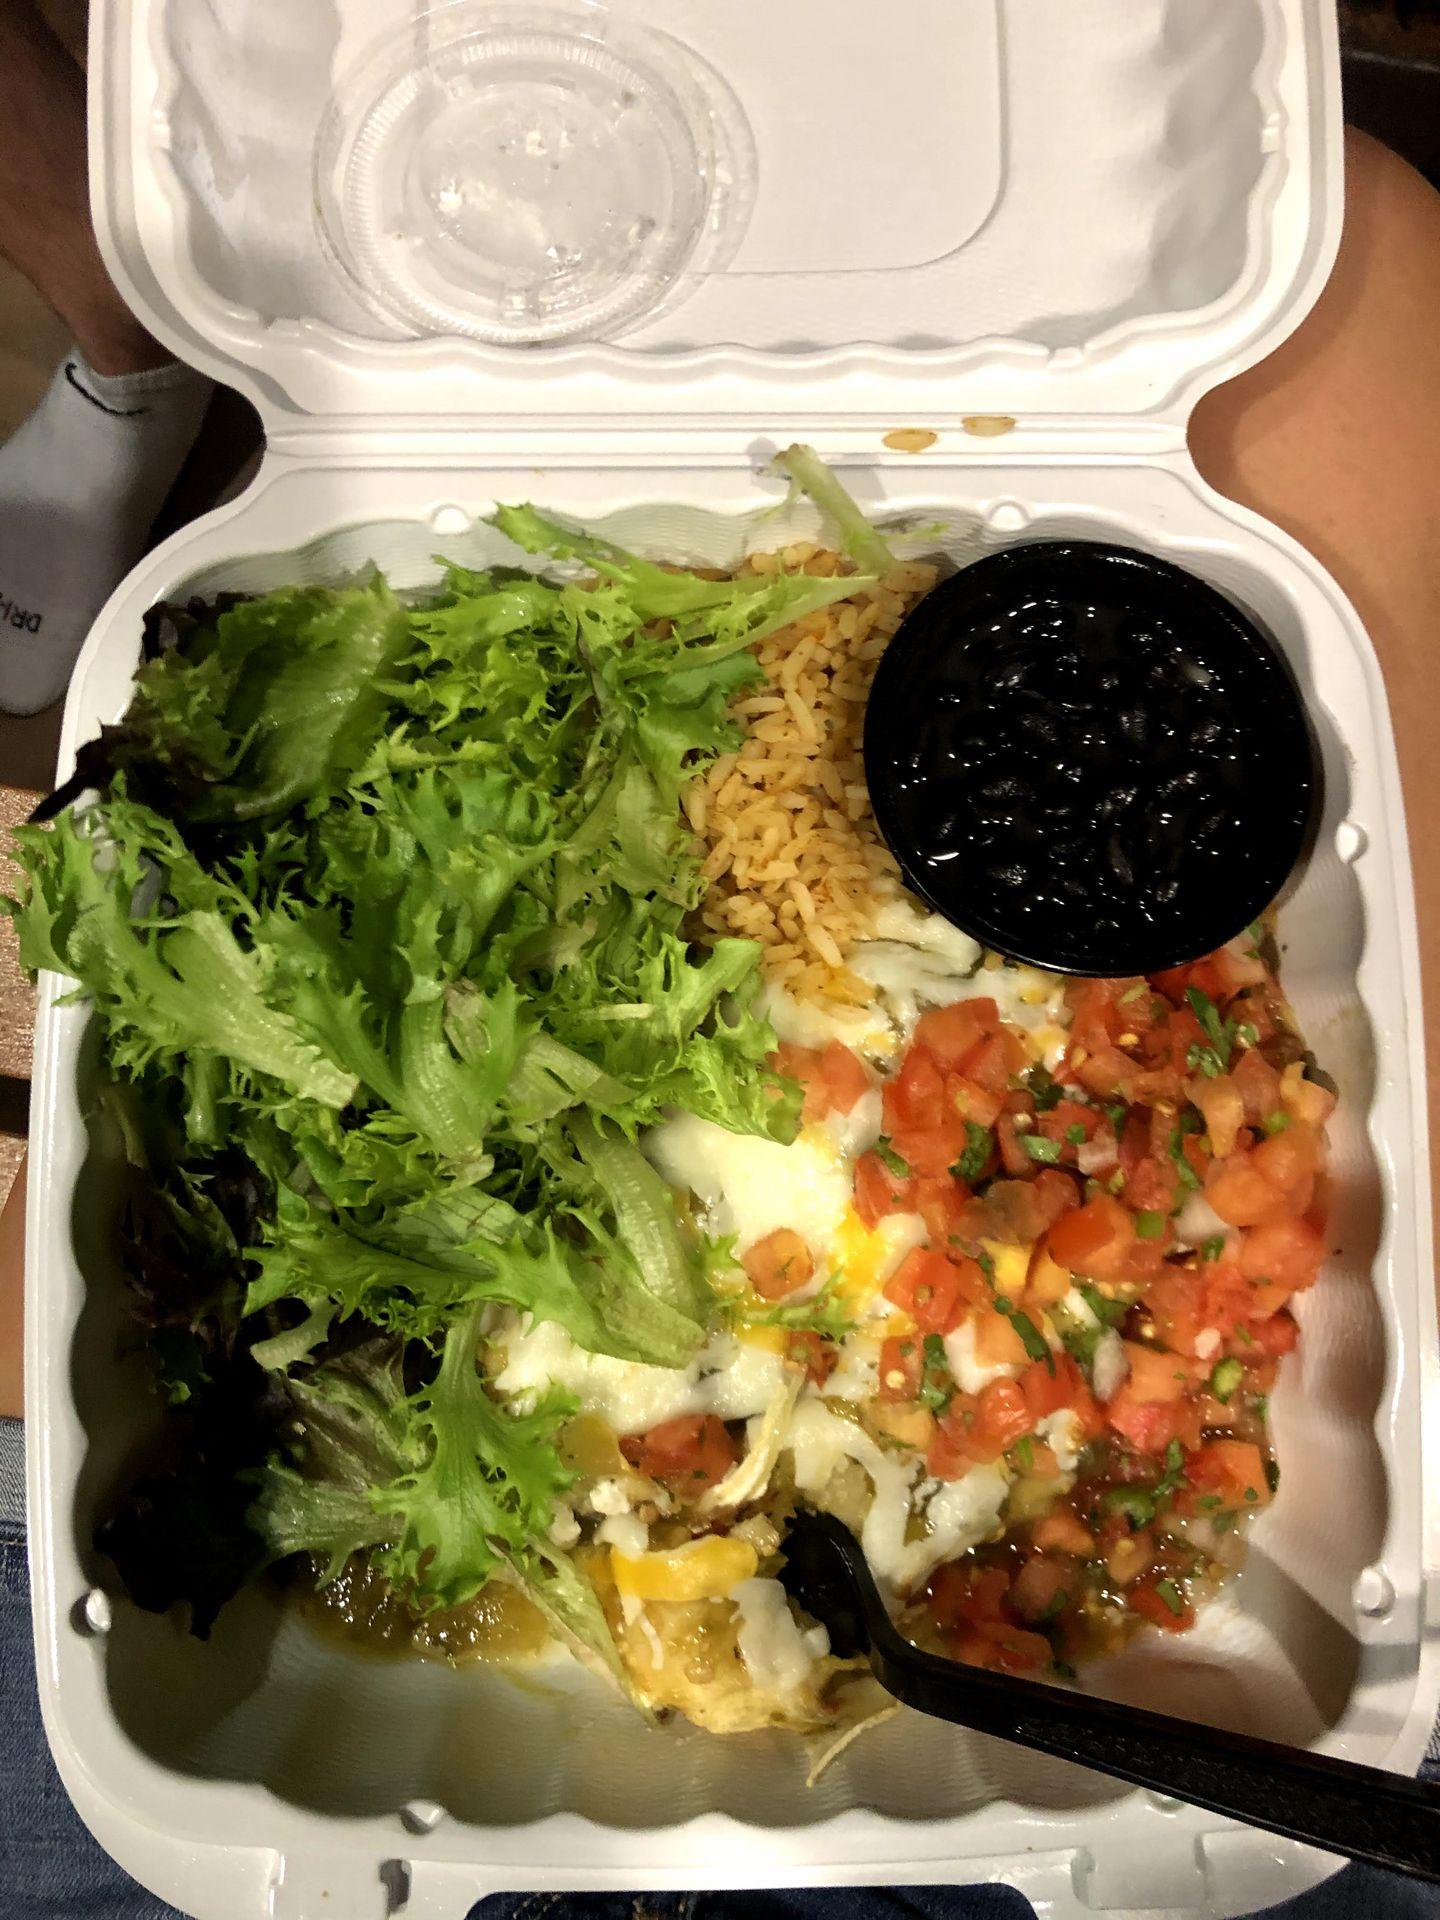 A take out box from Whiptail with Spaghetti Squash enchiladas.